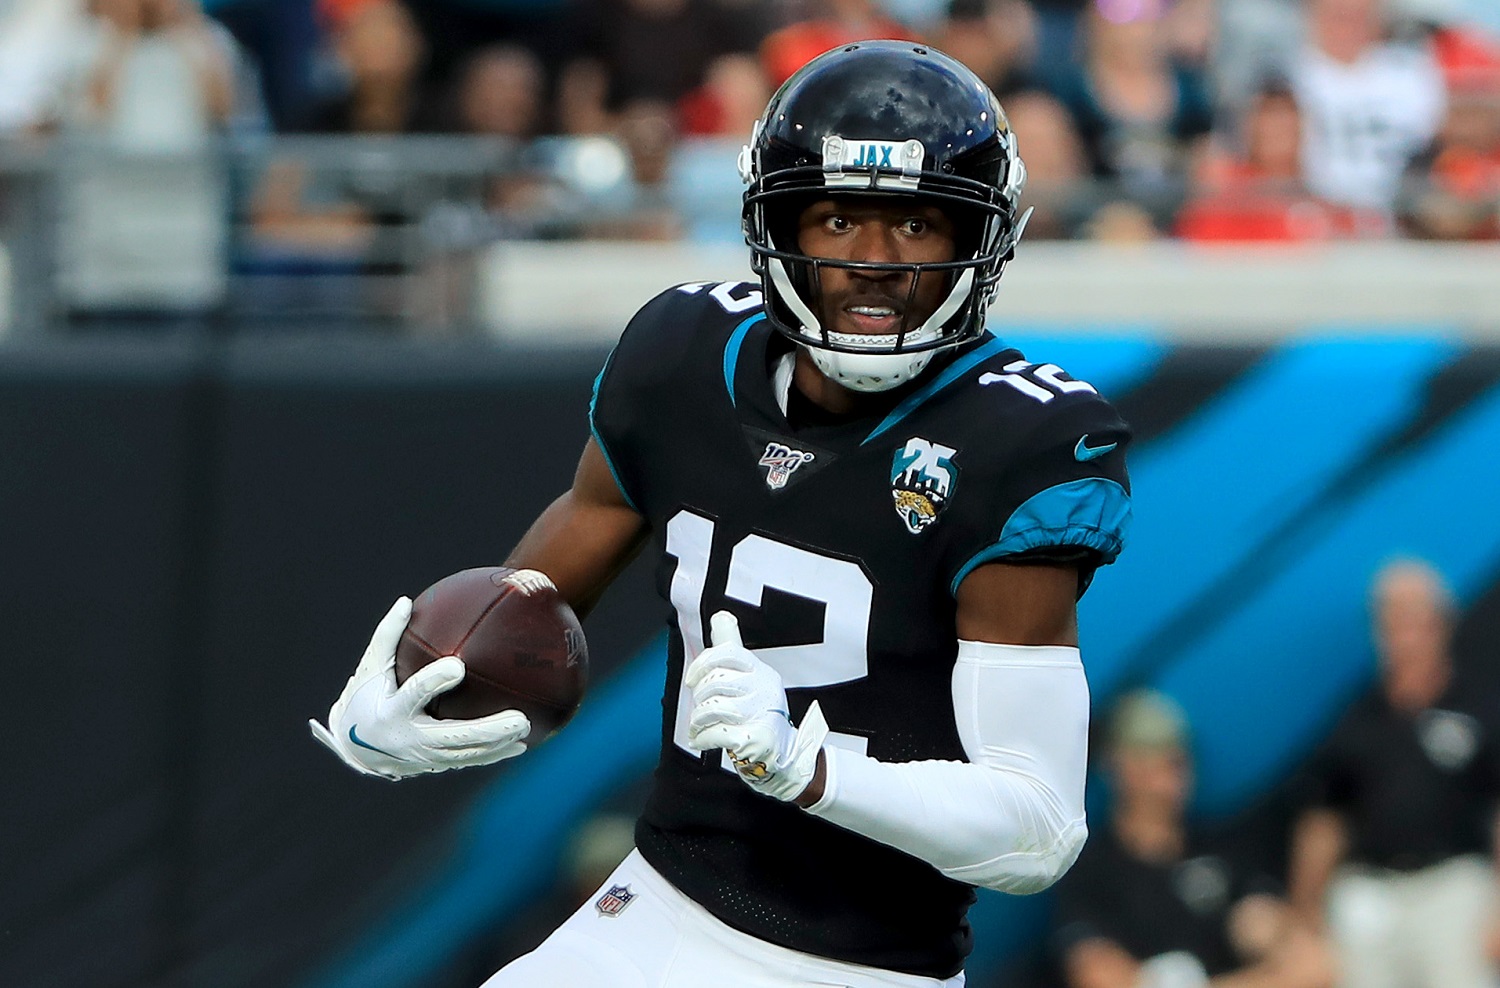 Dede Westbrook of the Jacksonville Jaguars runs for yardage during the game against the Tampa Bay Buccaneers at TIAA Bank Field on Dec. 1, 2019, in Jacksonville, Florida.